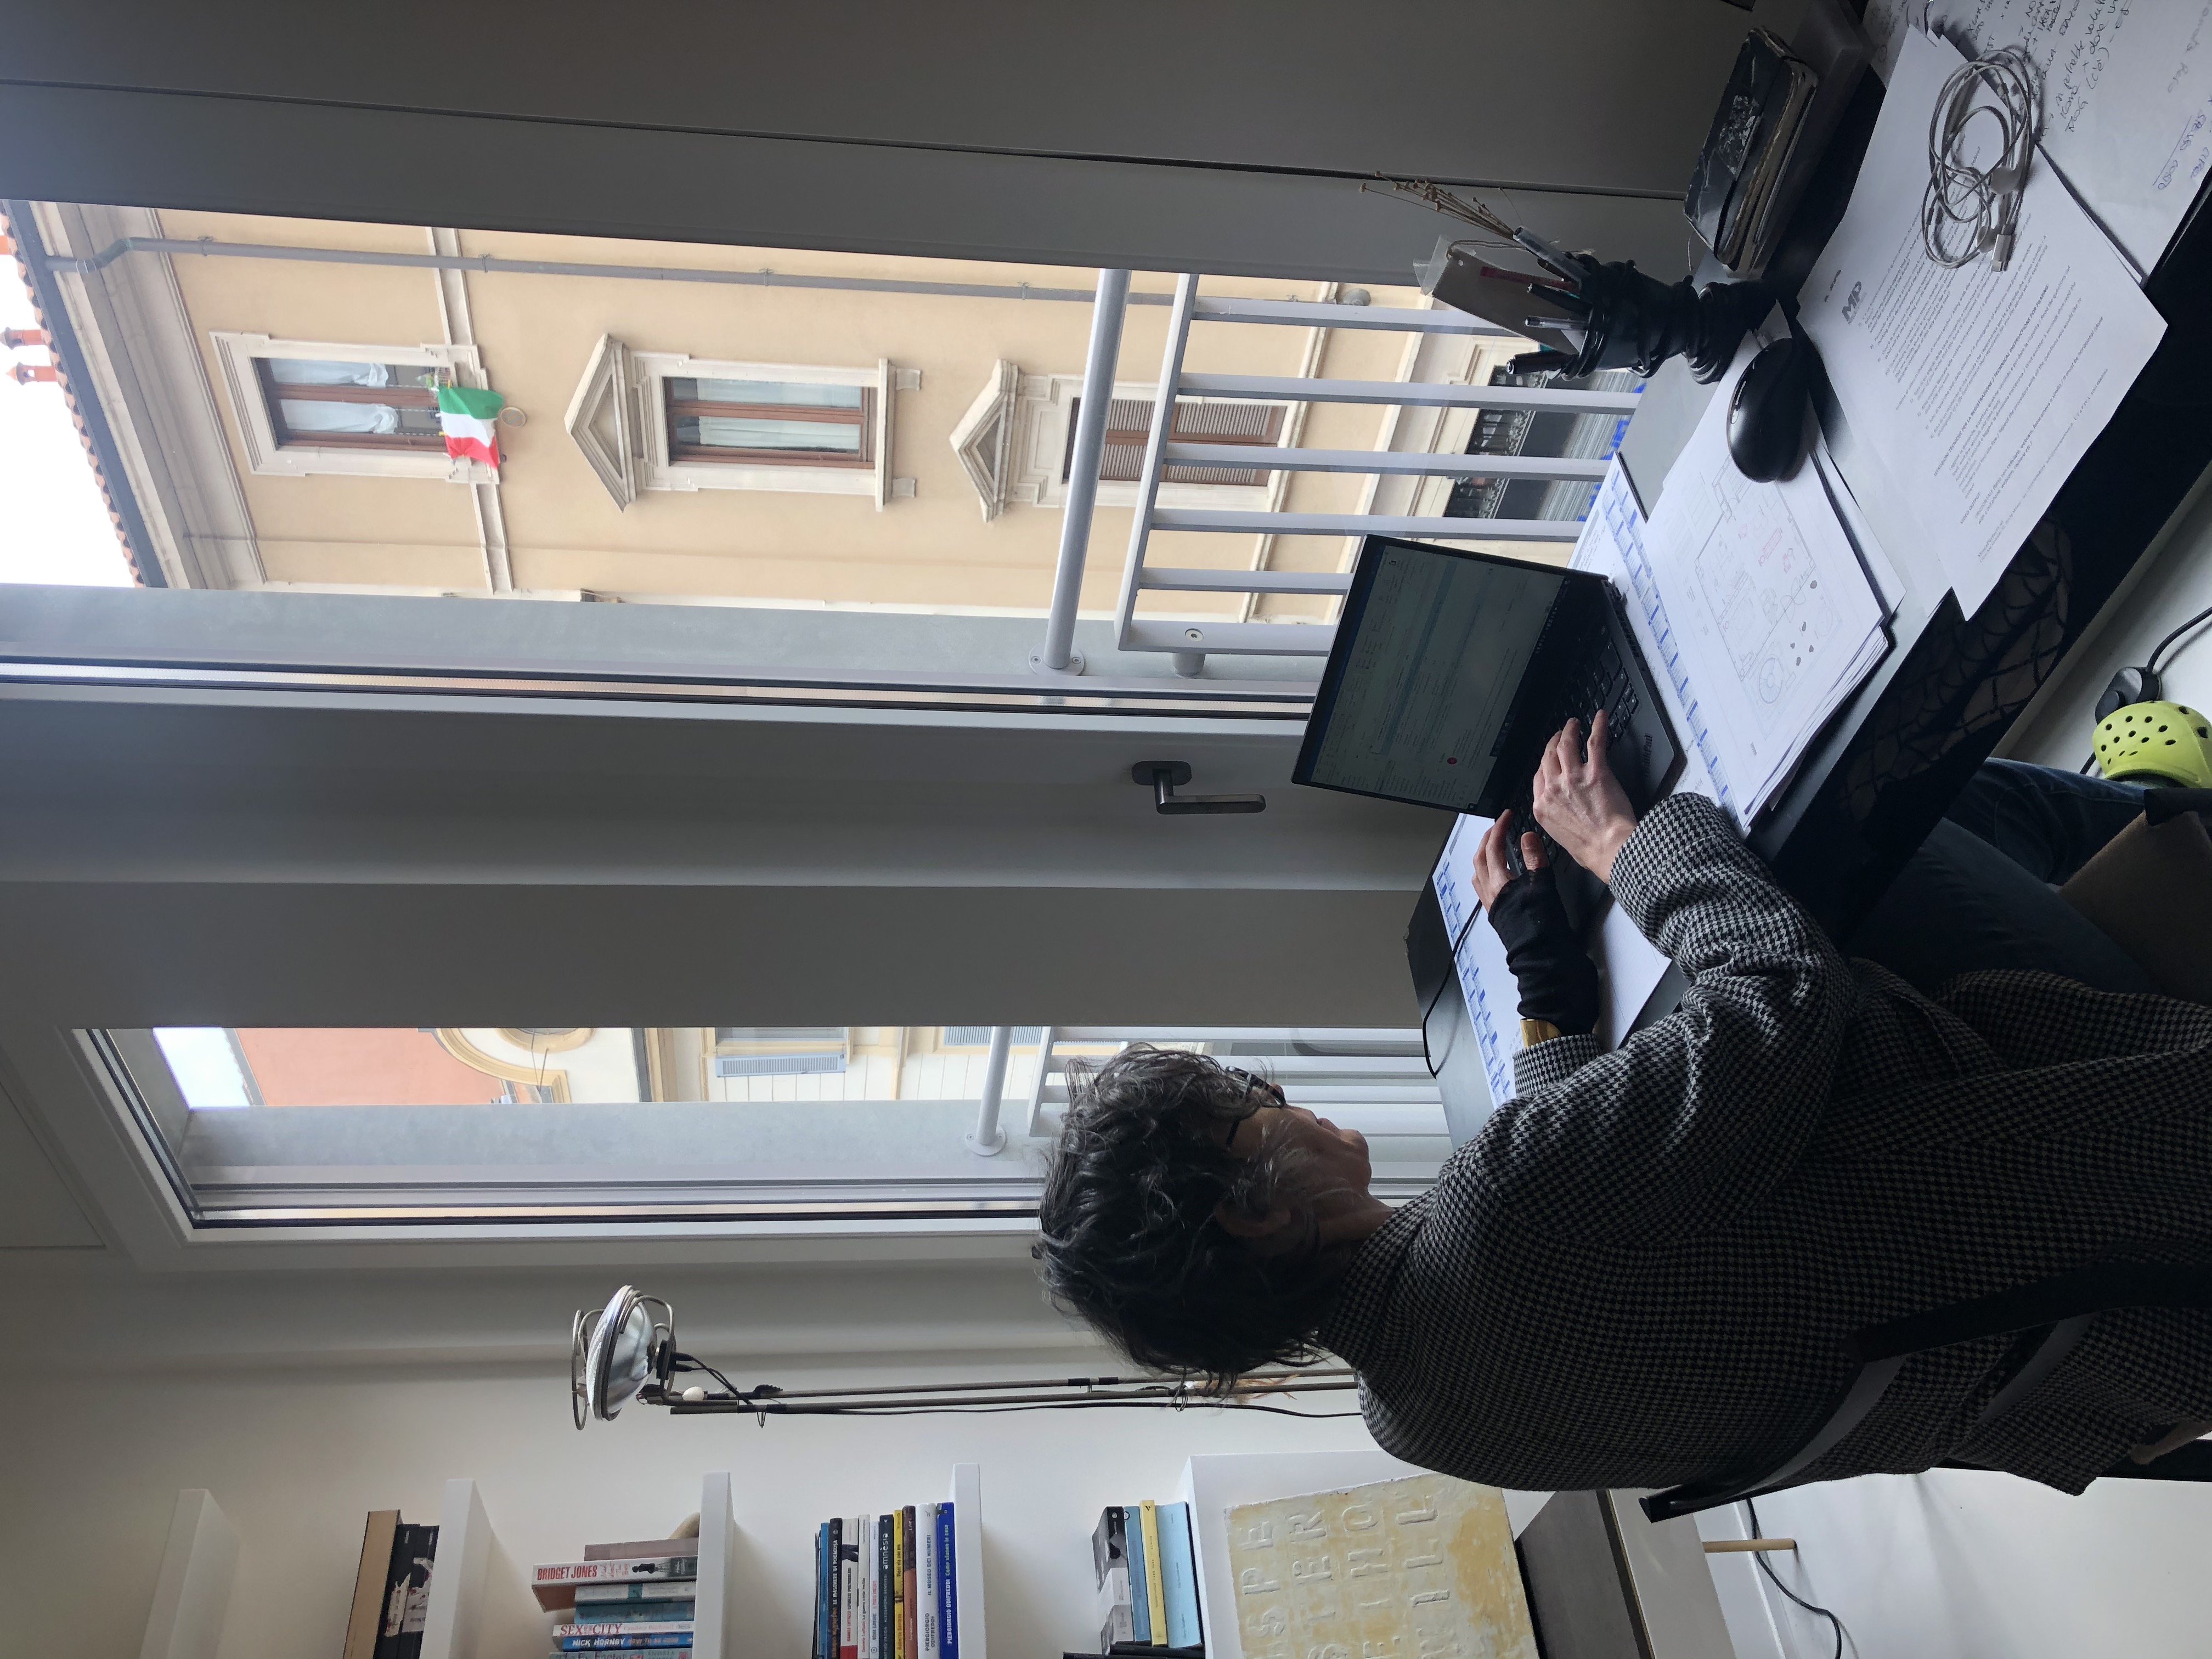 Carola working from home in Milan where the family was in lockdown for three months. Photo c/o Carola Bestetti.